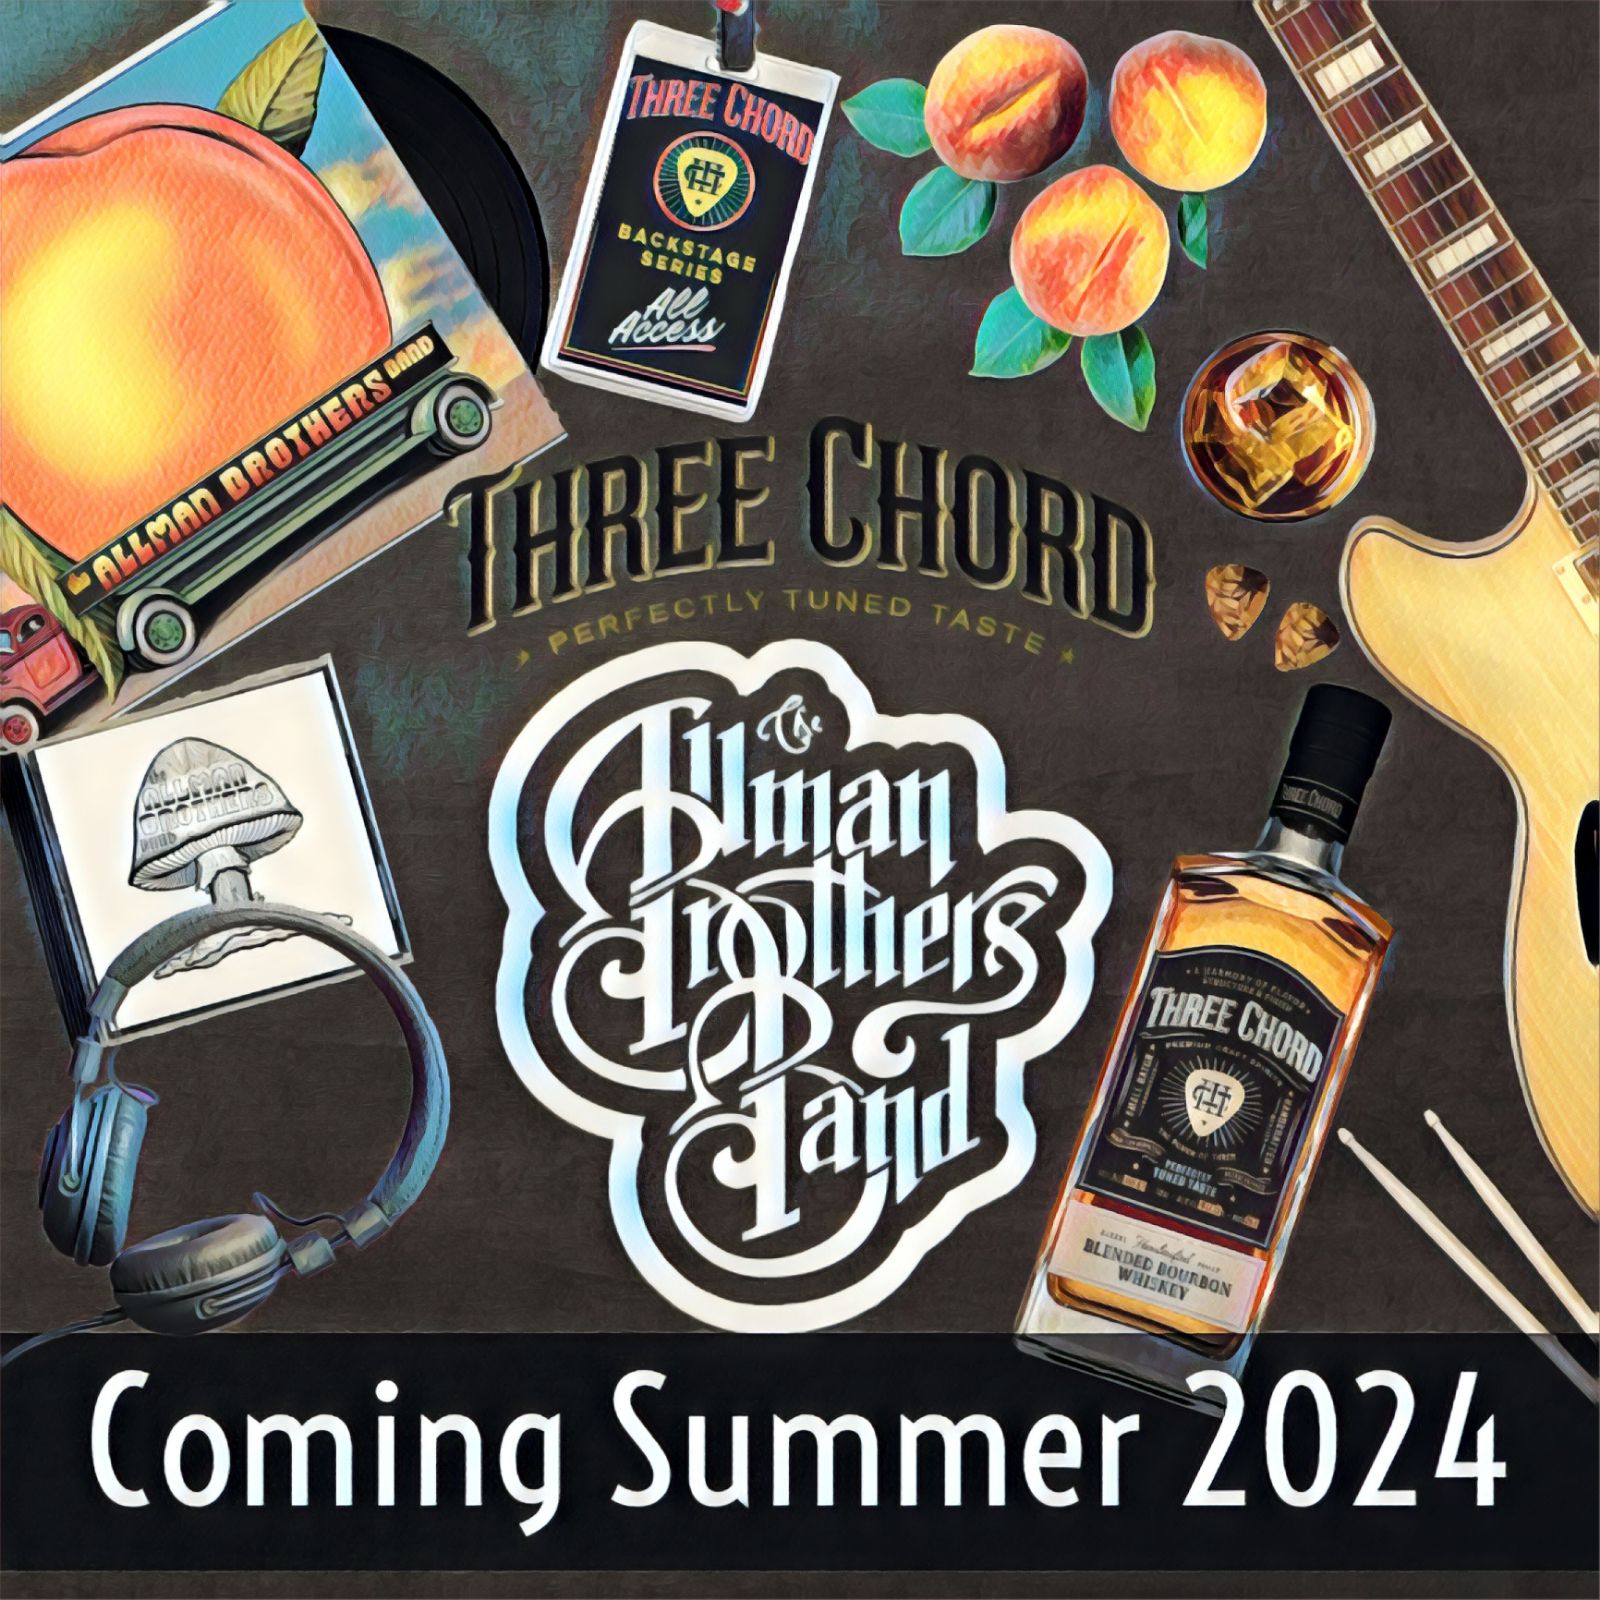 Three Chord Bourbon Lands New Collaboration with Allman Brothers Band